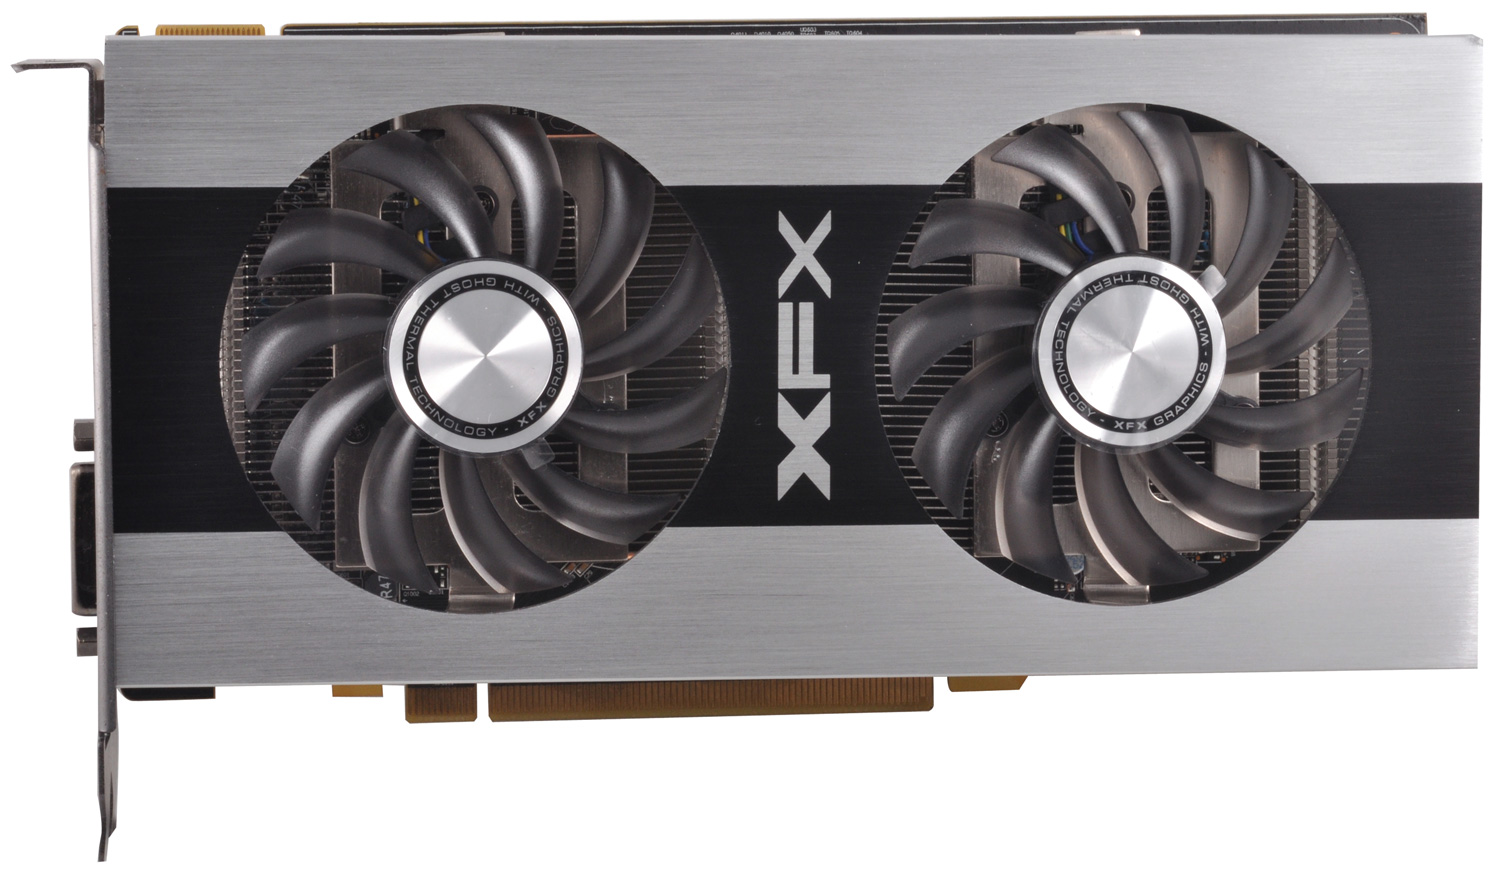 Meet The Xfx R7770 Black Edition S Double Dissipation Amd Radeon Hd 7750 Radeon Hd 7770 Ghz Edition Review Evading The Price Performance Curve